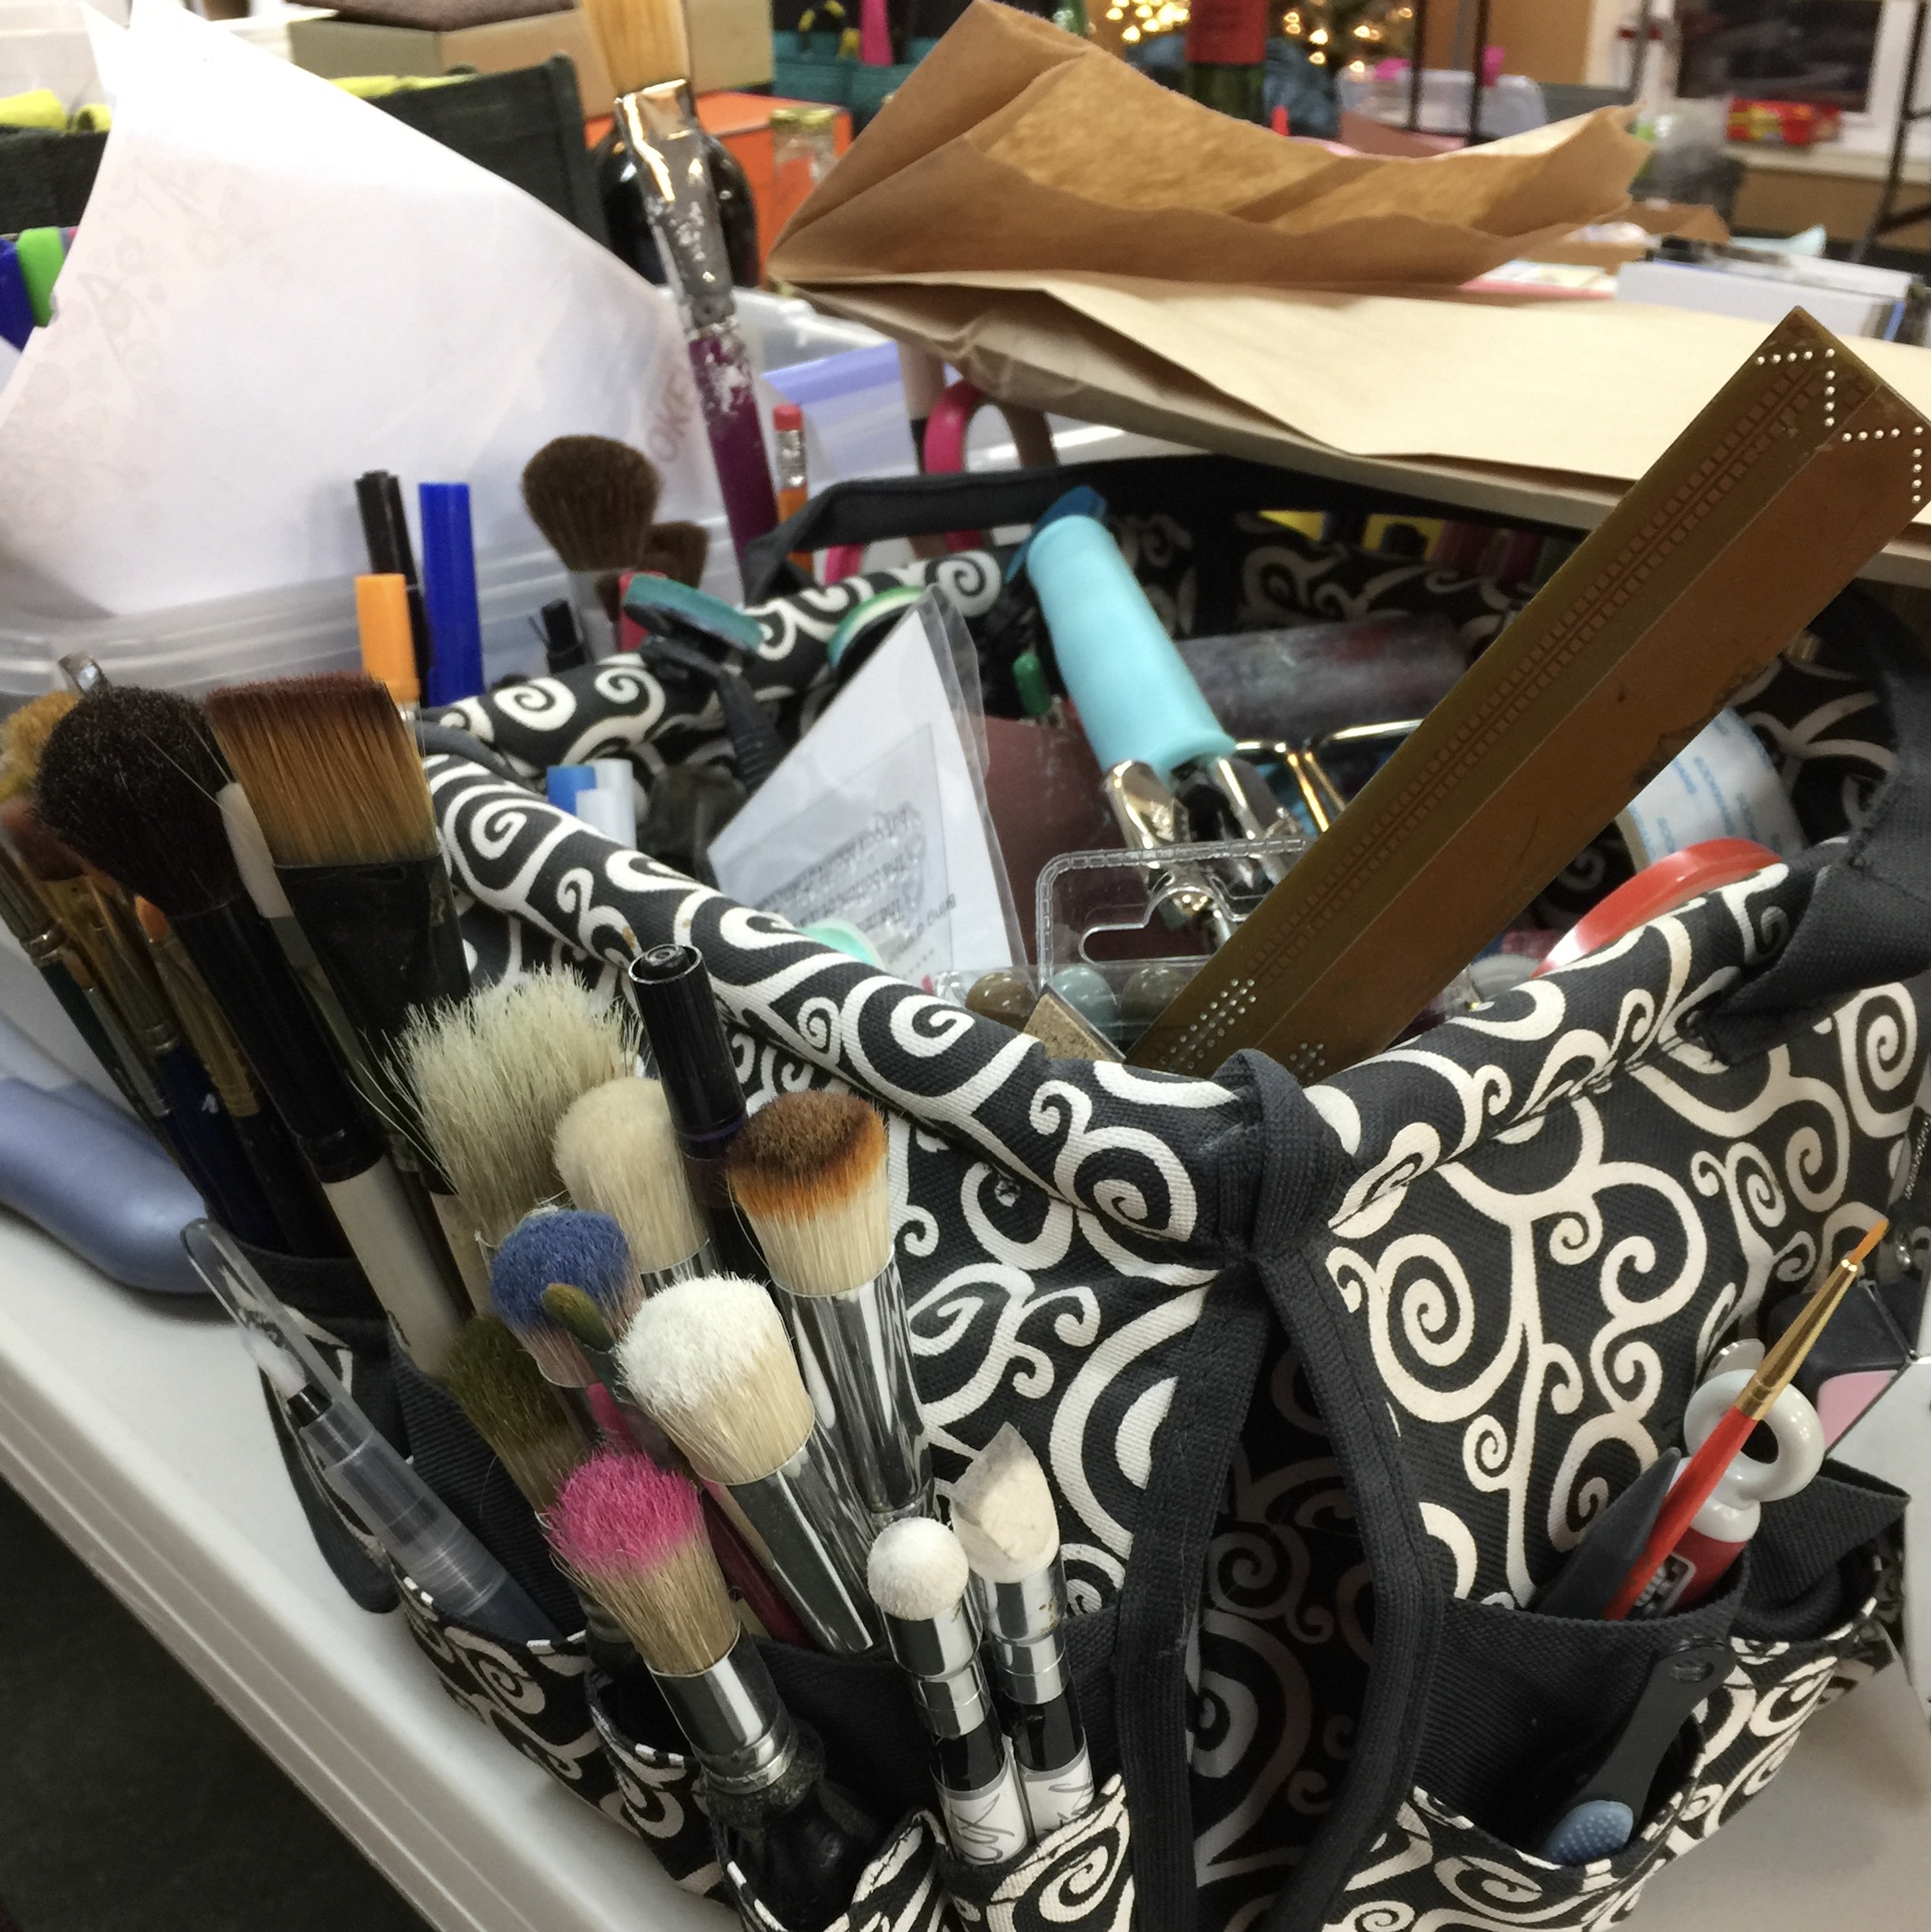 Where You Create / Packing for a retreat / organize on the go / scrapbooking supplies